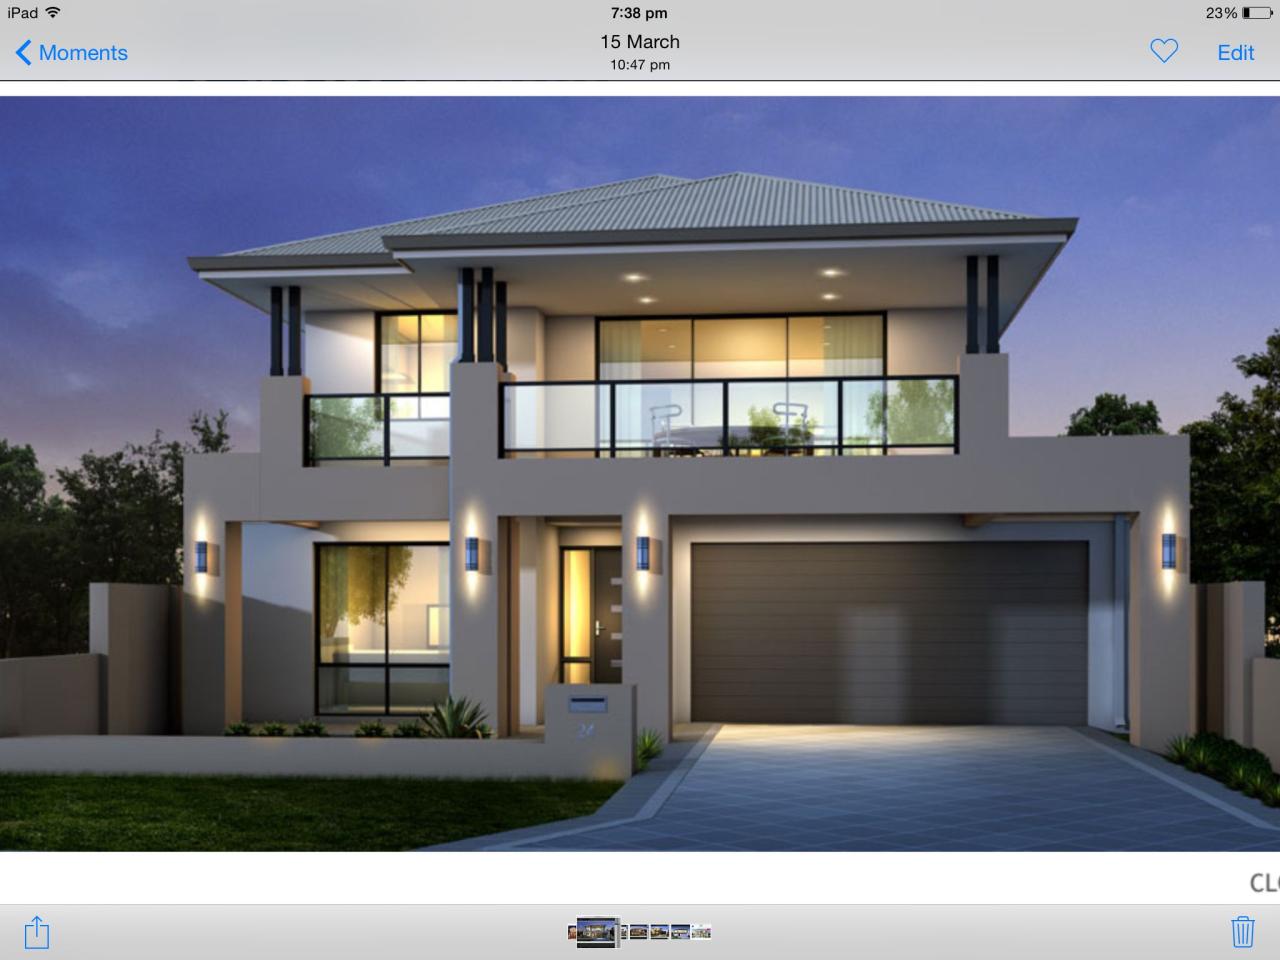 Two storey house facade, grey and black, balcony over garage, glass